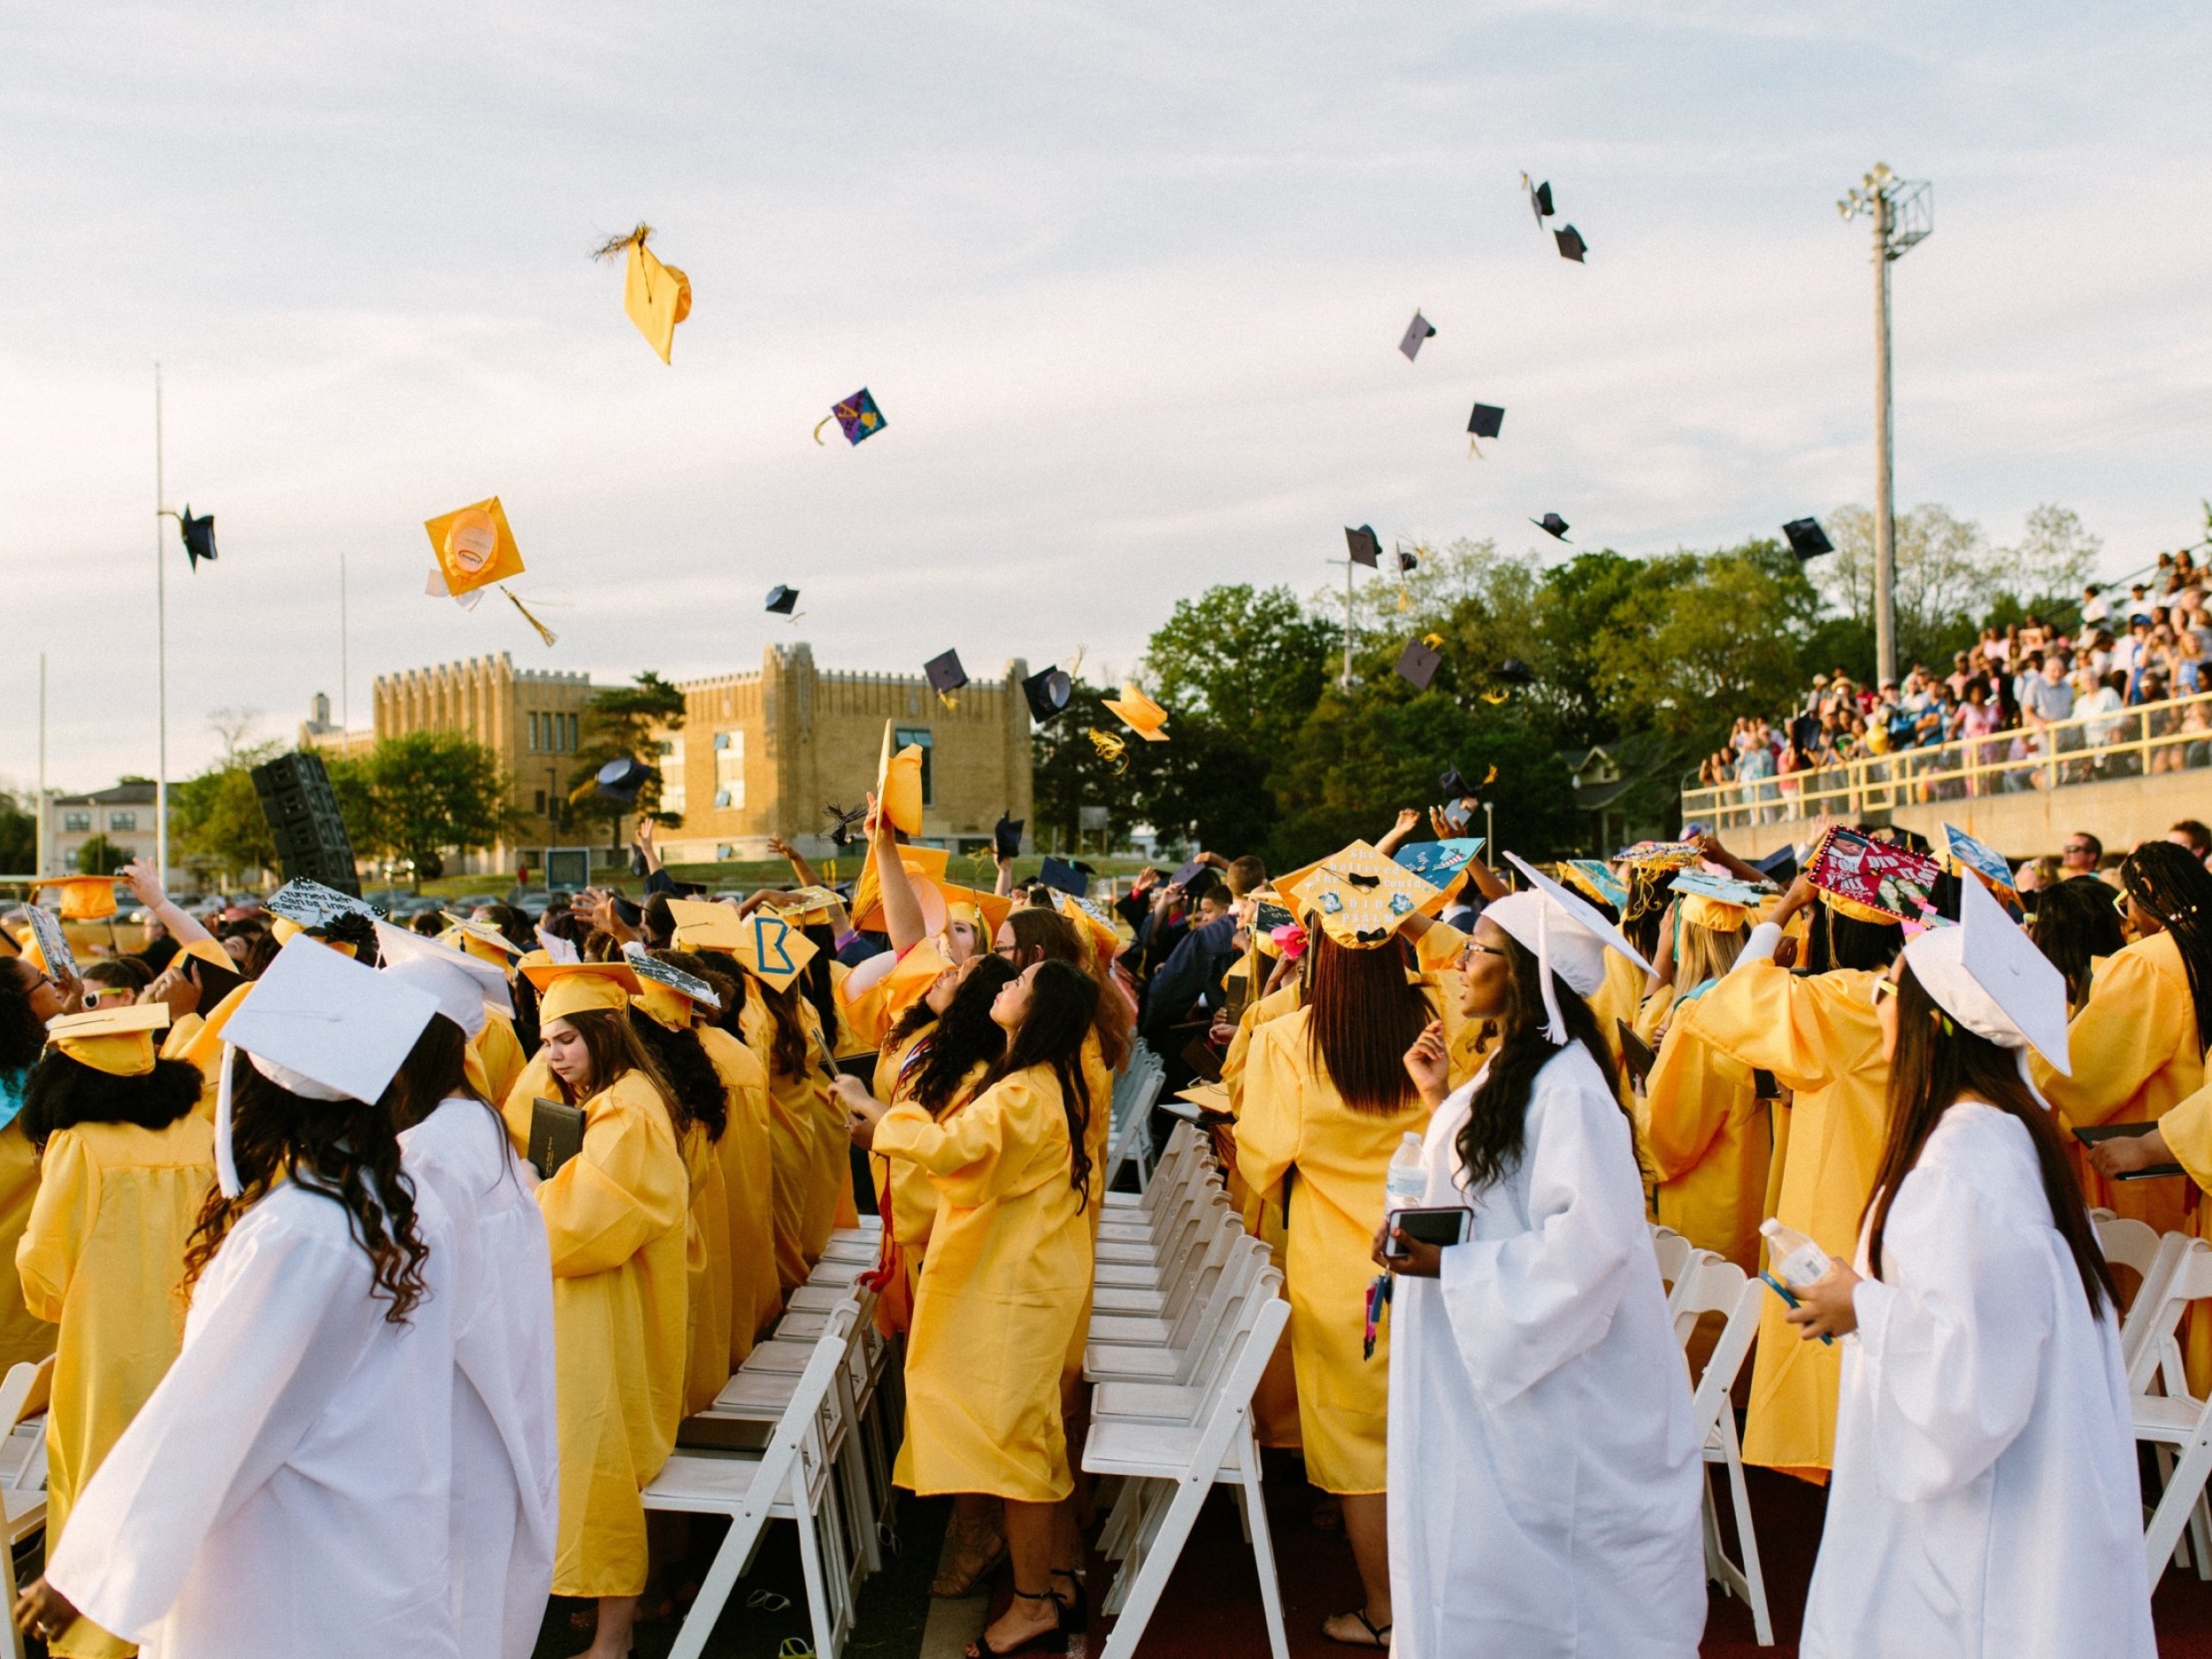 Graduation ceremony with students in yellow and white cap and gown, throwing caps into the air in celebration.